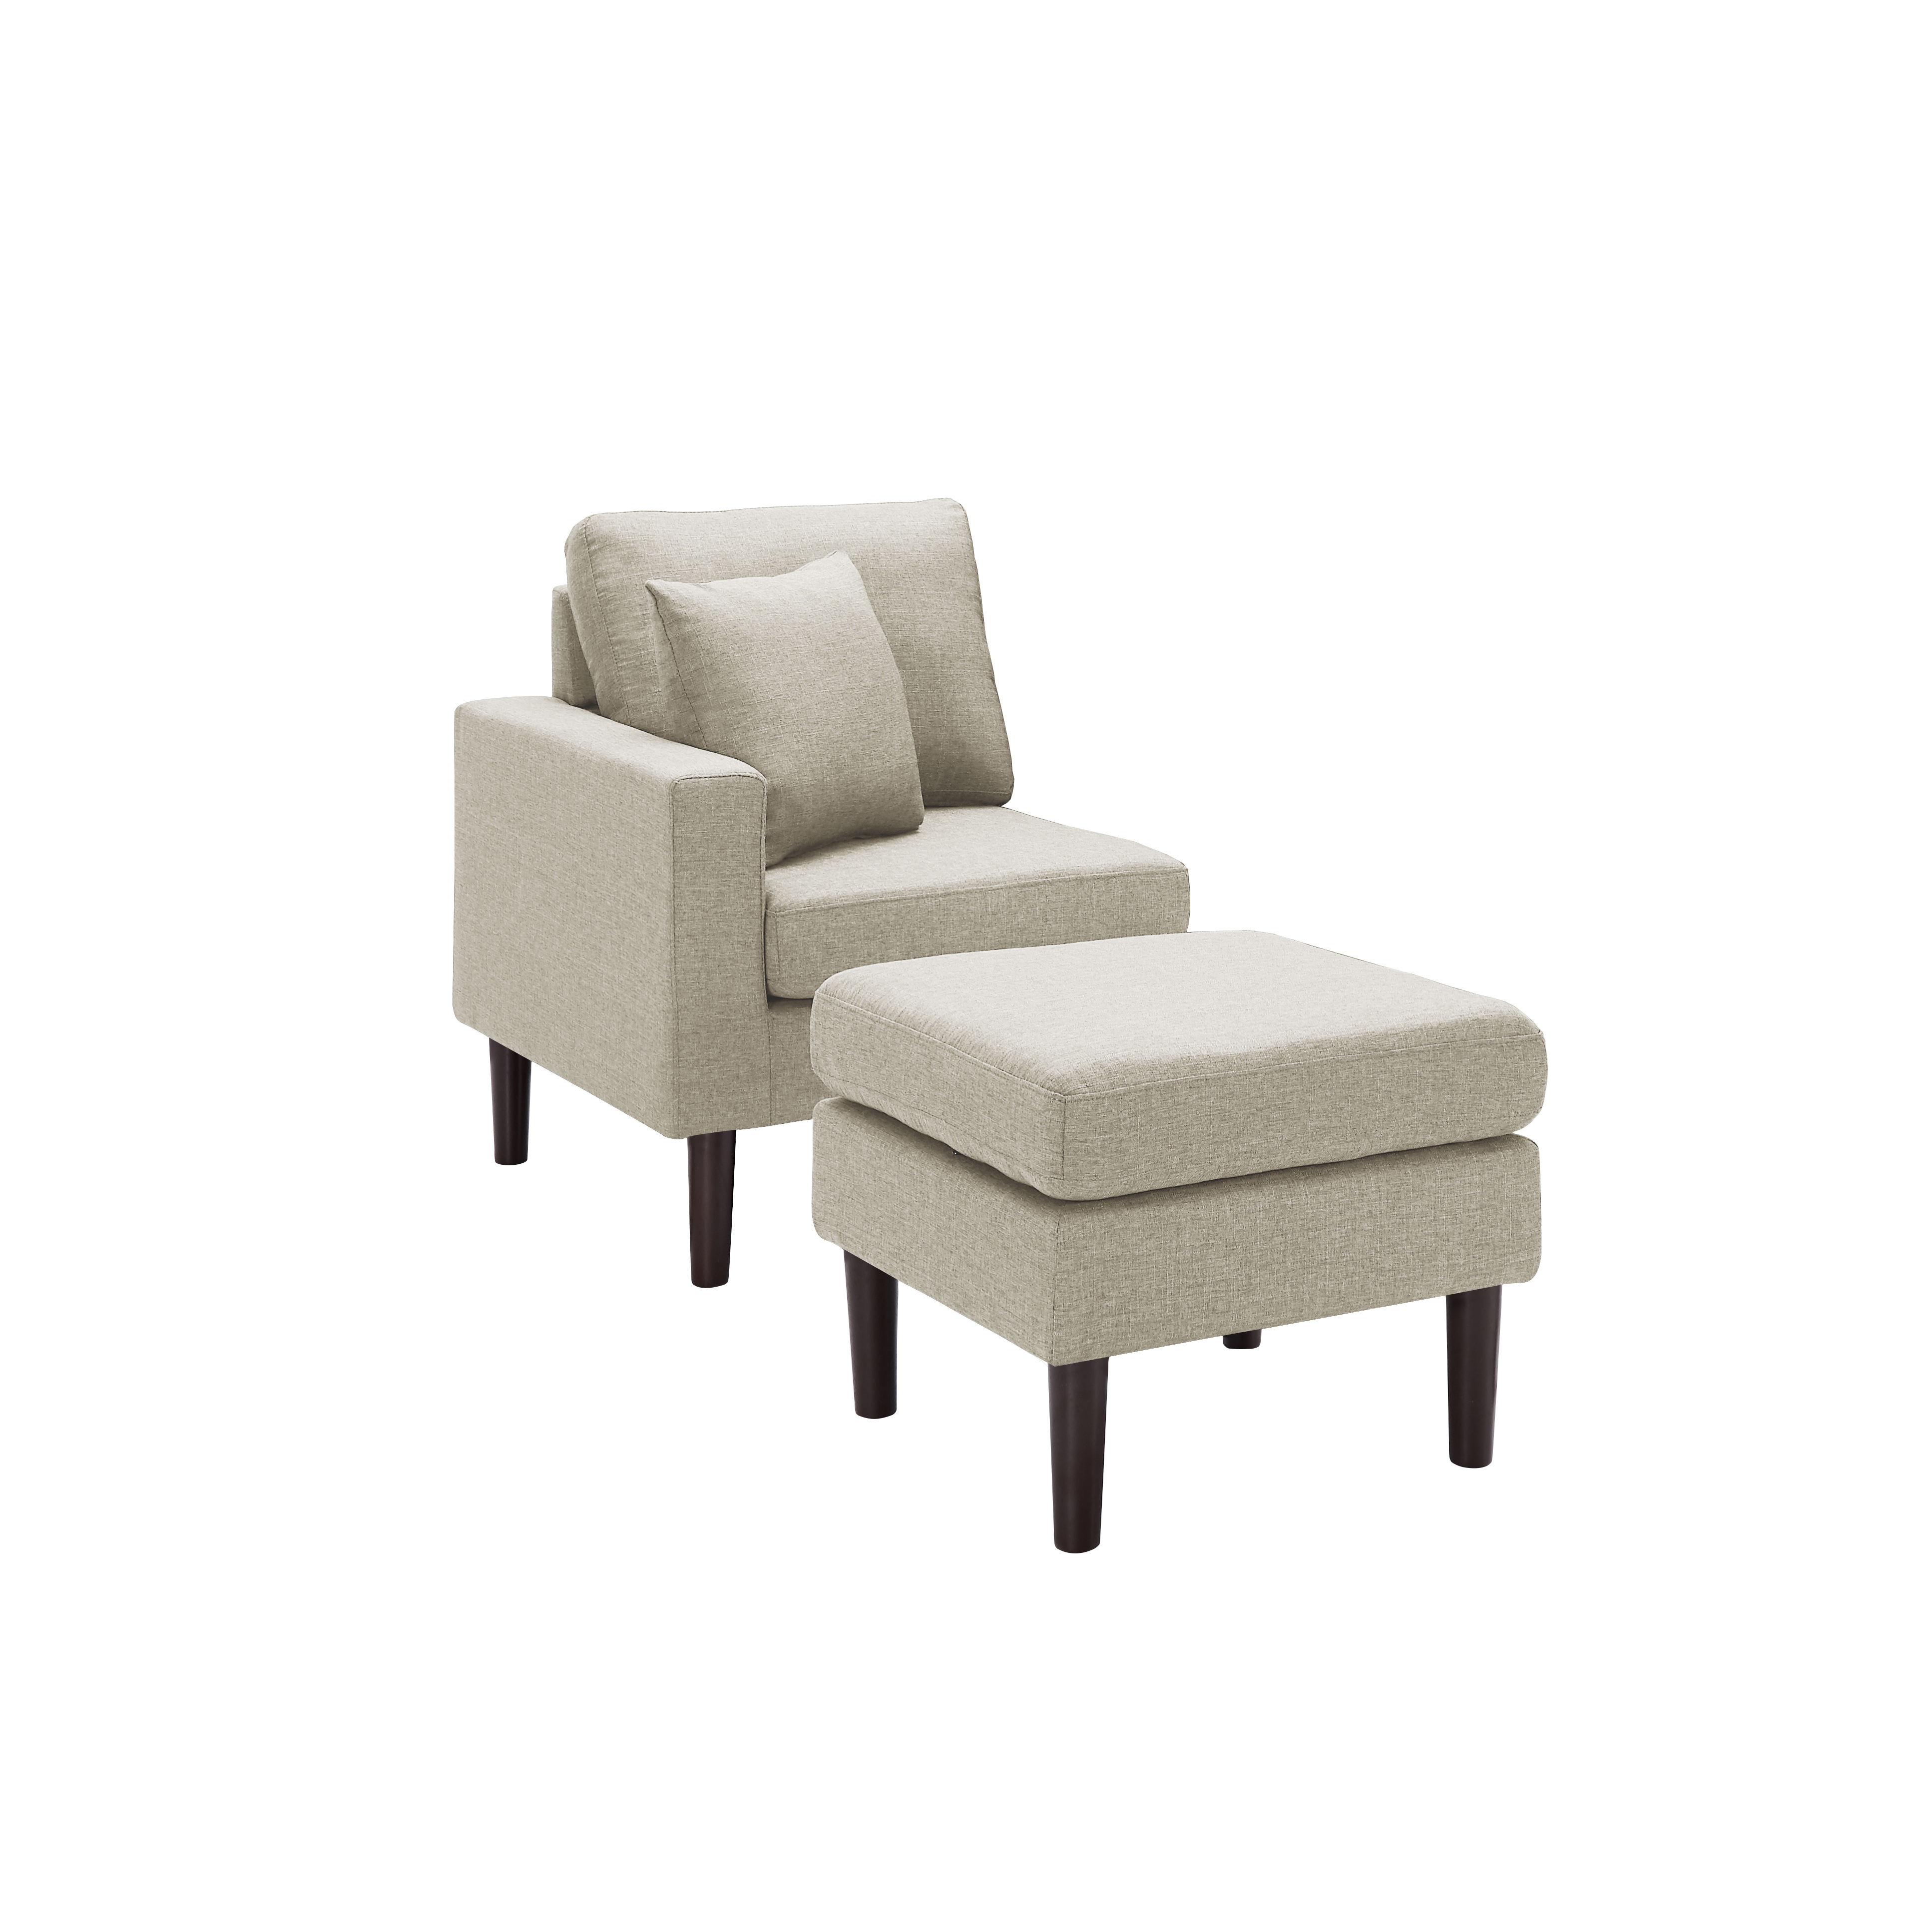 Left facing arm chair with ottoman BEIGE (PART ONLY, Sold separately)-Boyel Living